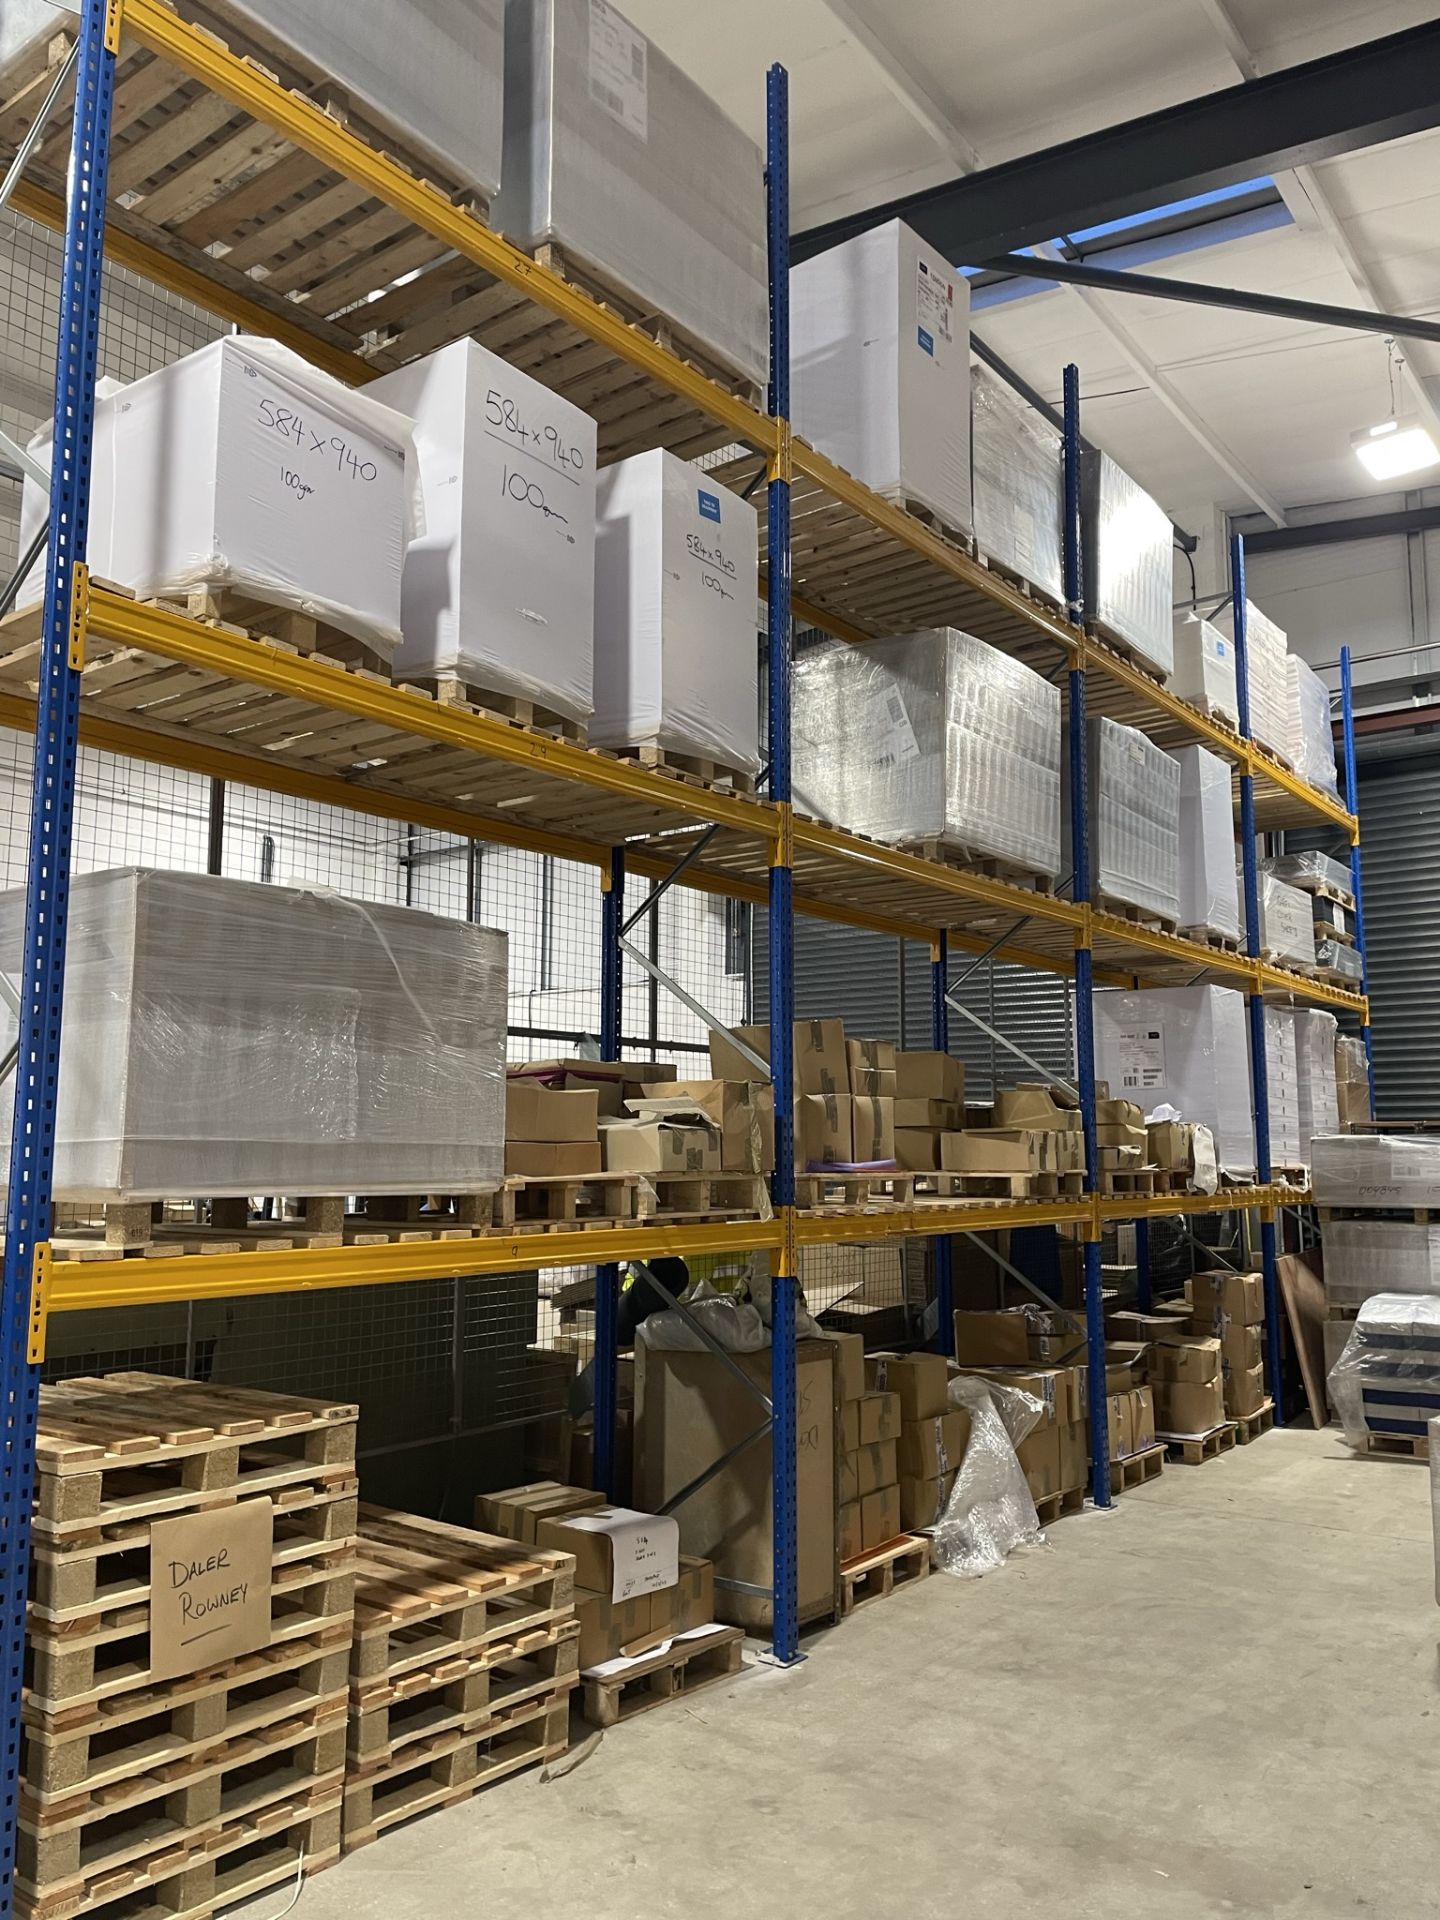 8 x Bays of 3 Tier Pallet Racking - CONTENTS EXCLUDED